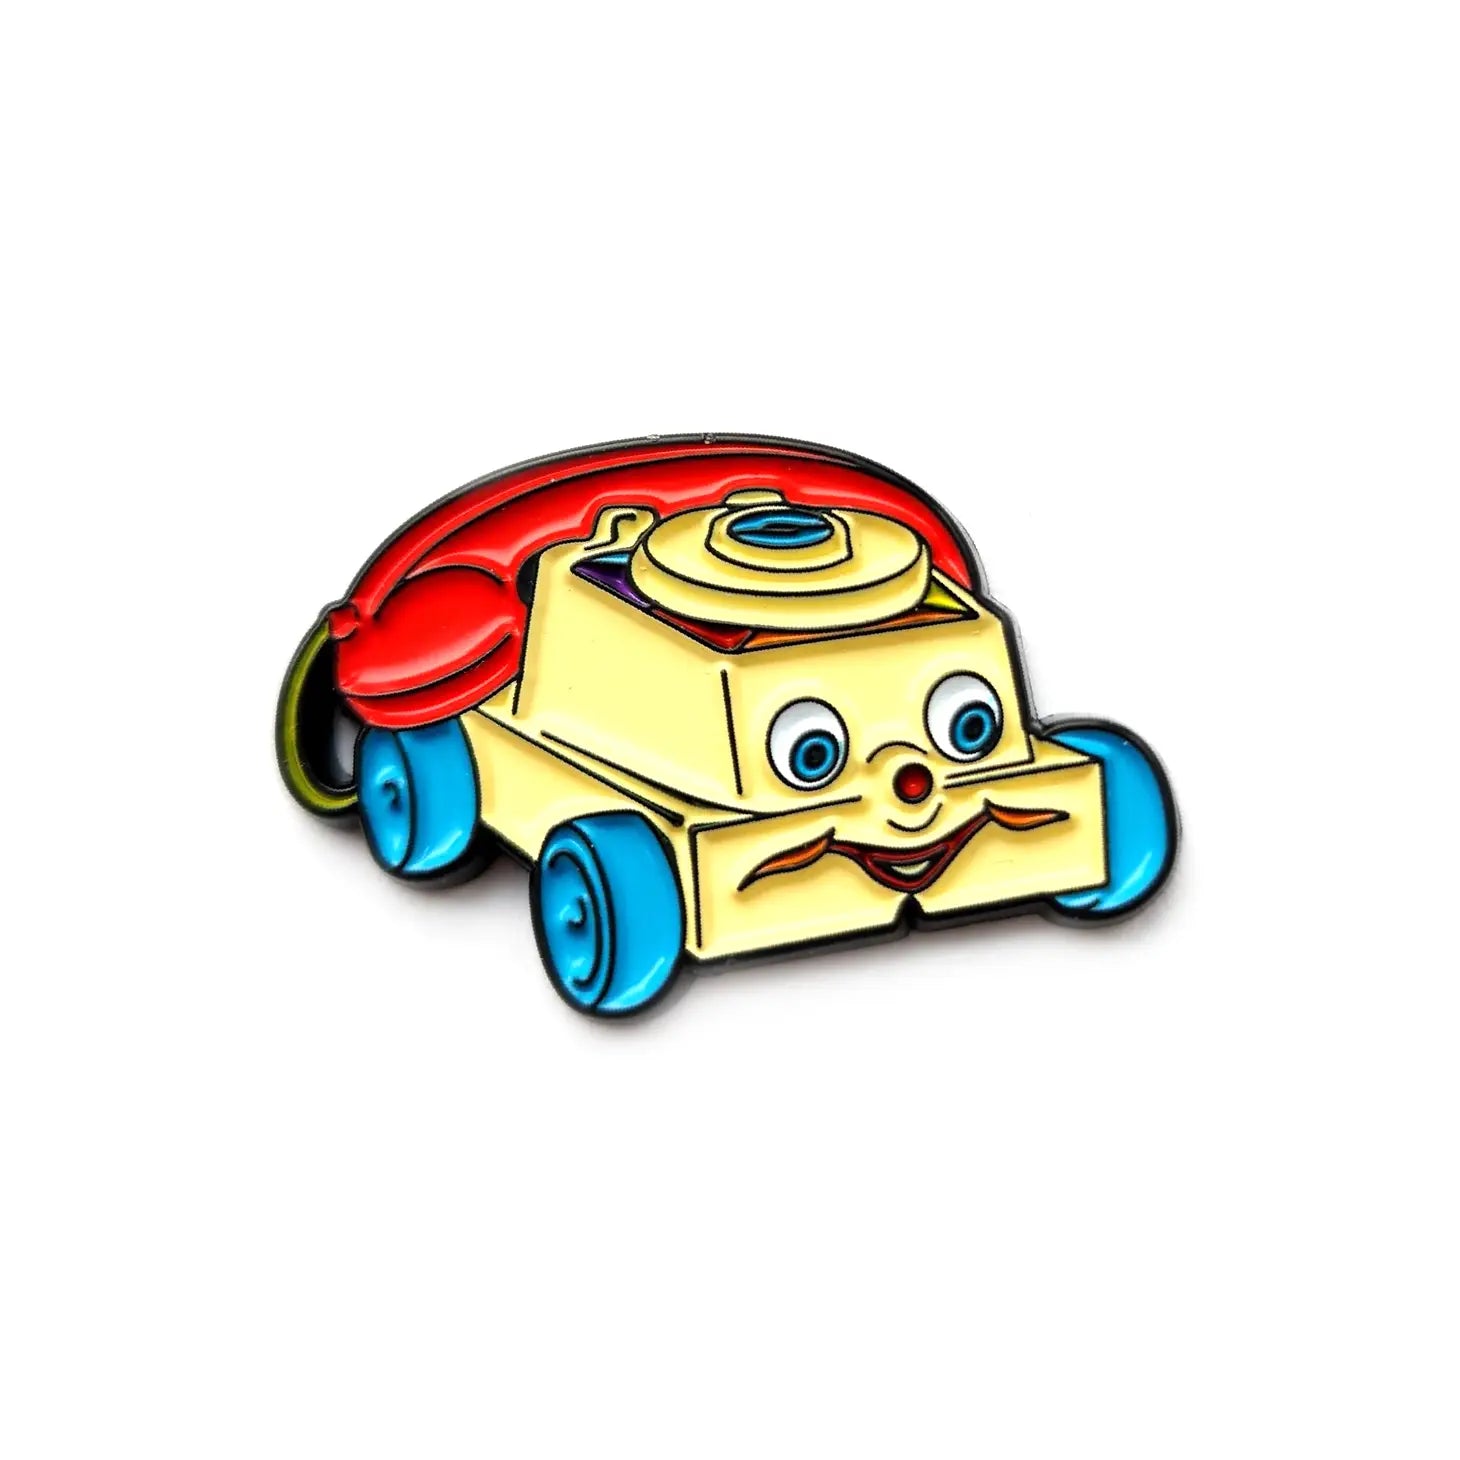 red, yellow, black, blue and white toy phone enamel pin